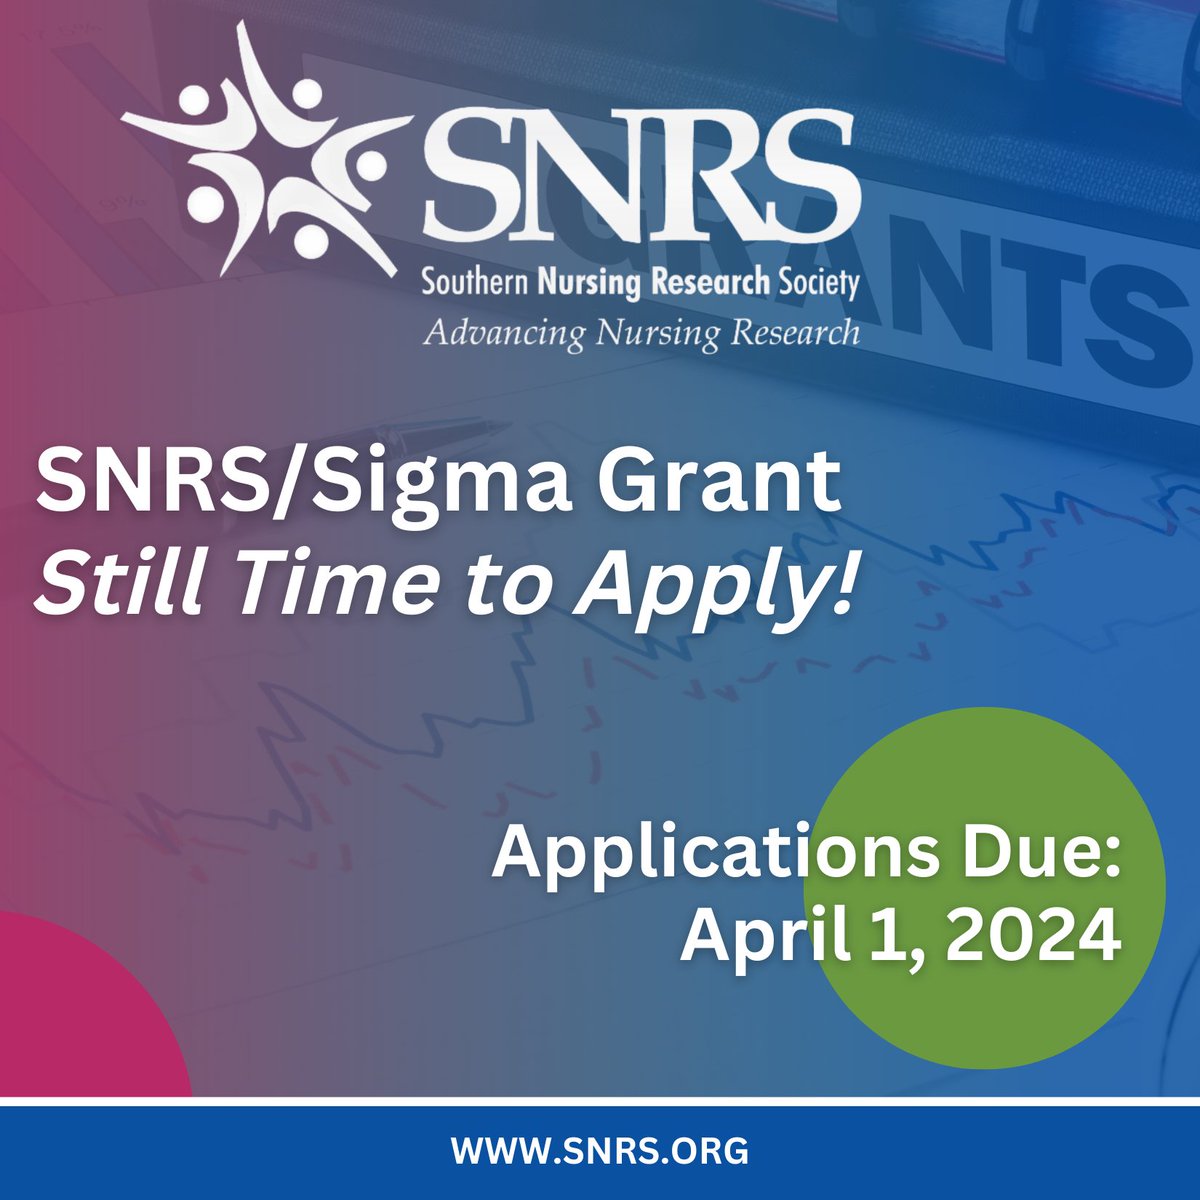 The deadline to apply for this grant award of $5,000 is April 1, 2024. Funding date is August 1, 2024. Apply online: sigmanursing.org/advance-elevat…